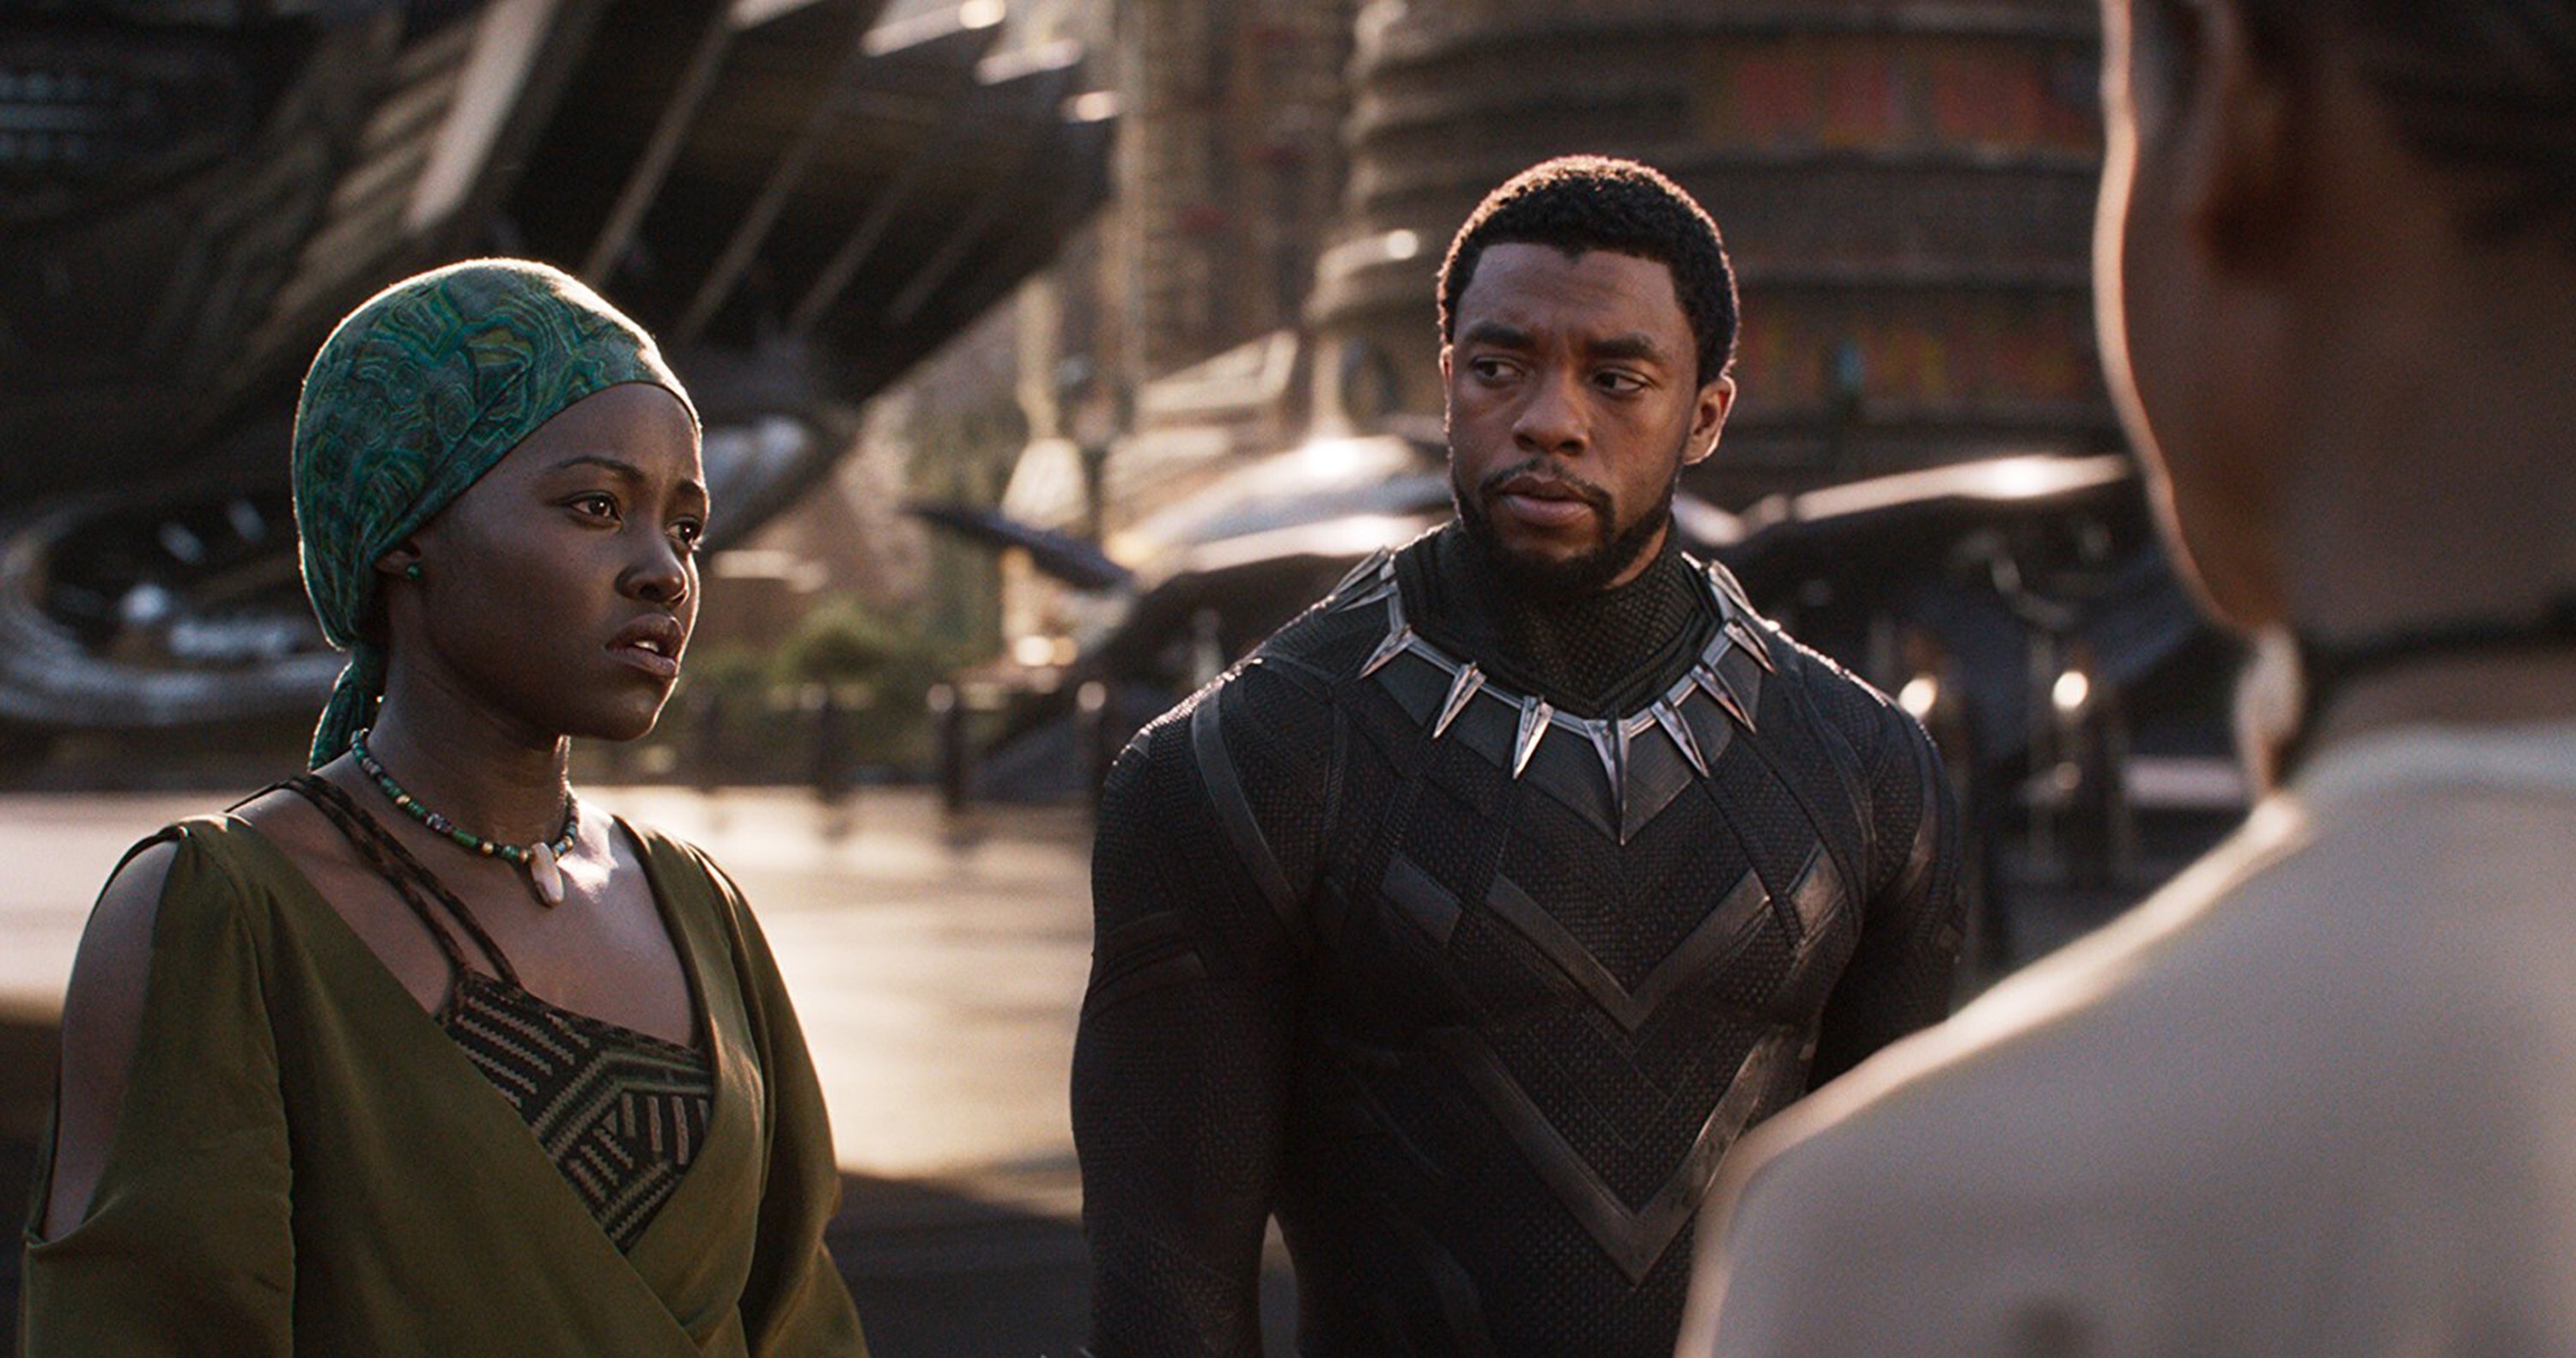 A still from the Black Panther film. Photo: Handout